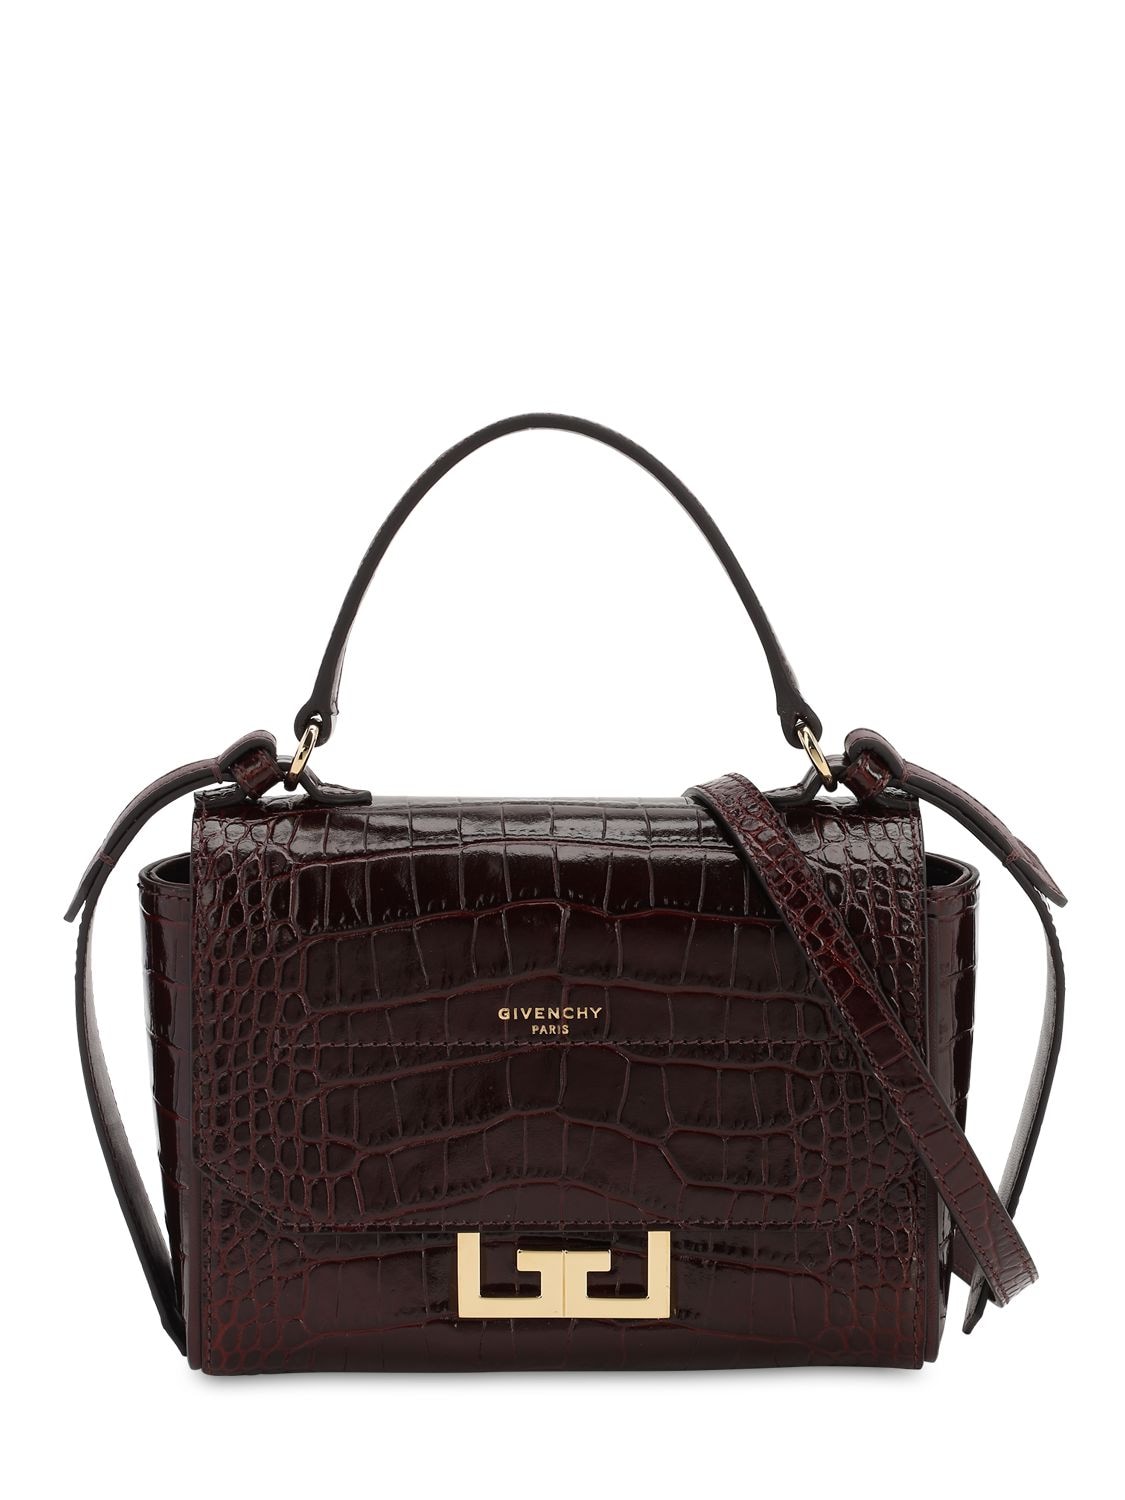 GIVENCHY MINI EDEN CROC EMBOSSED LEATHER BAG,70ID1A007-NTQY0